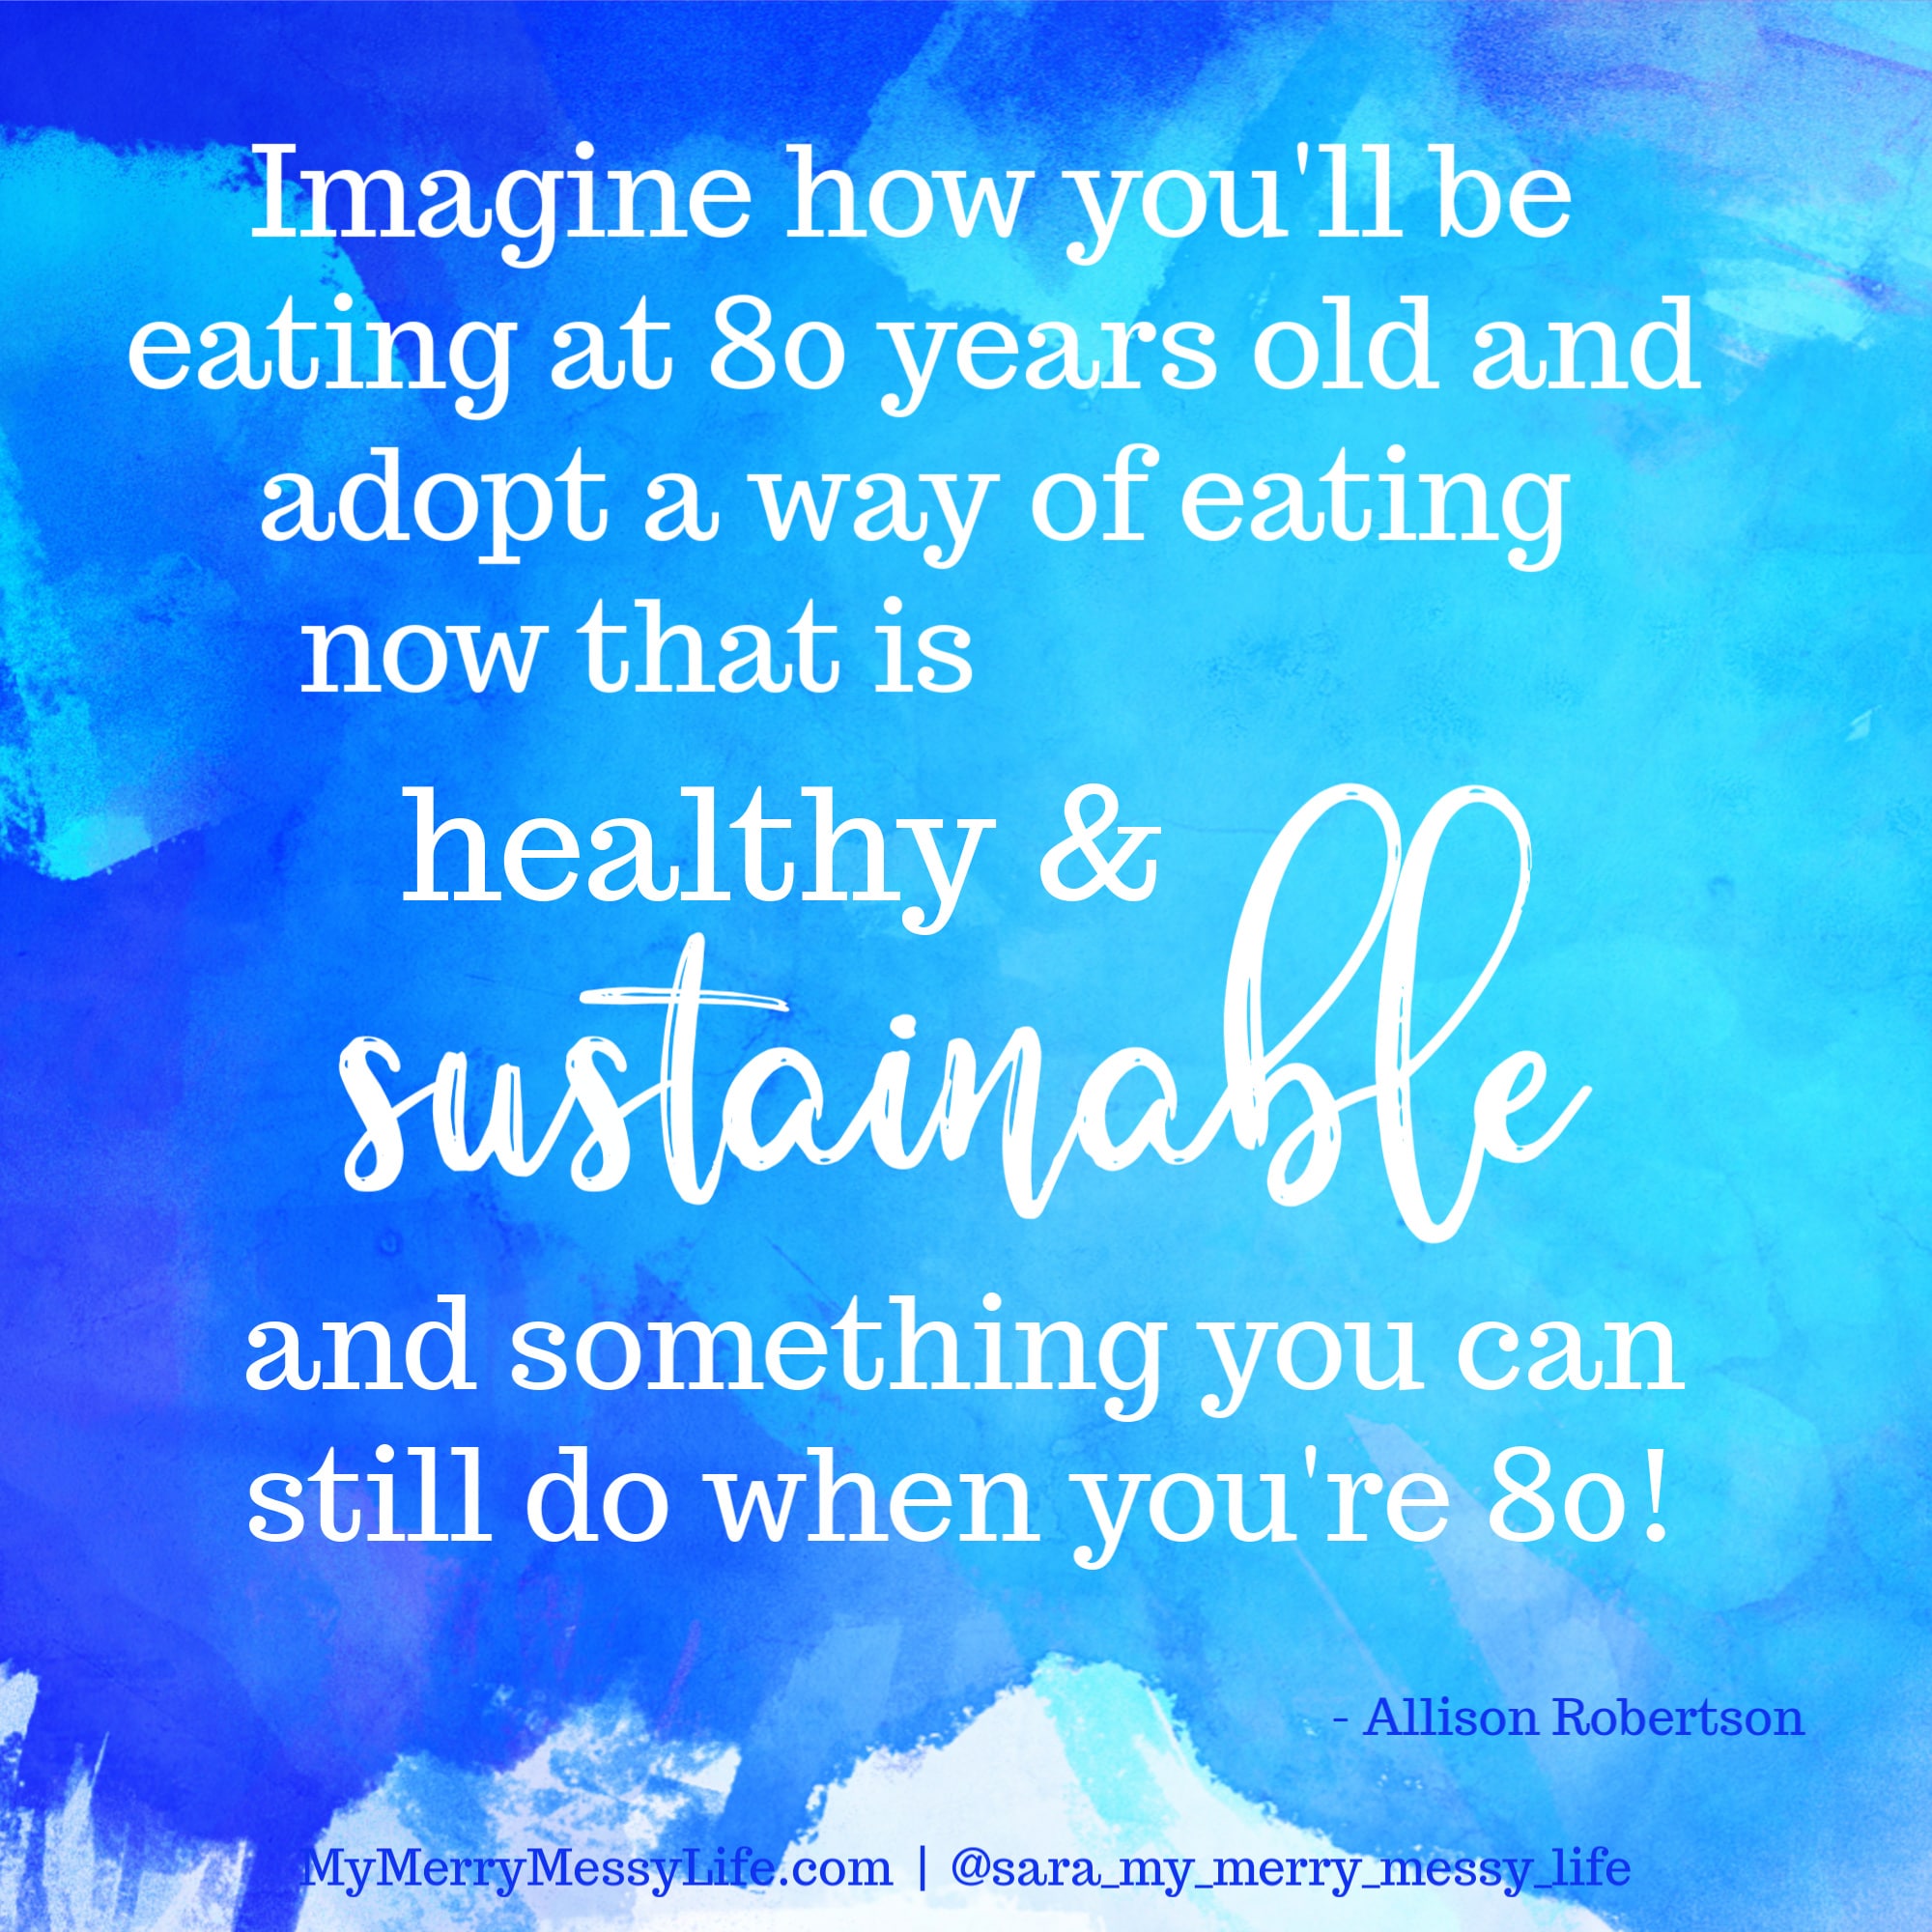 Imagine how you'll be eating at 80 years old and adopt a way of eating now that is healthy and sustainable and something you can still do when you're 80! - Allison Robertson on The Merry Messy Moms Show podcast with Sara McFall of mymerrymessylife.com